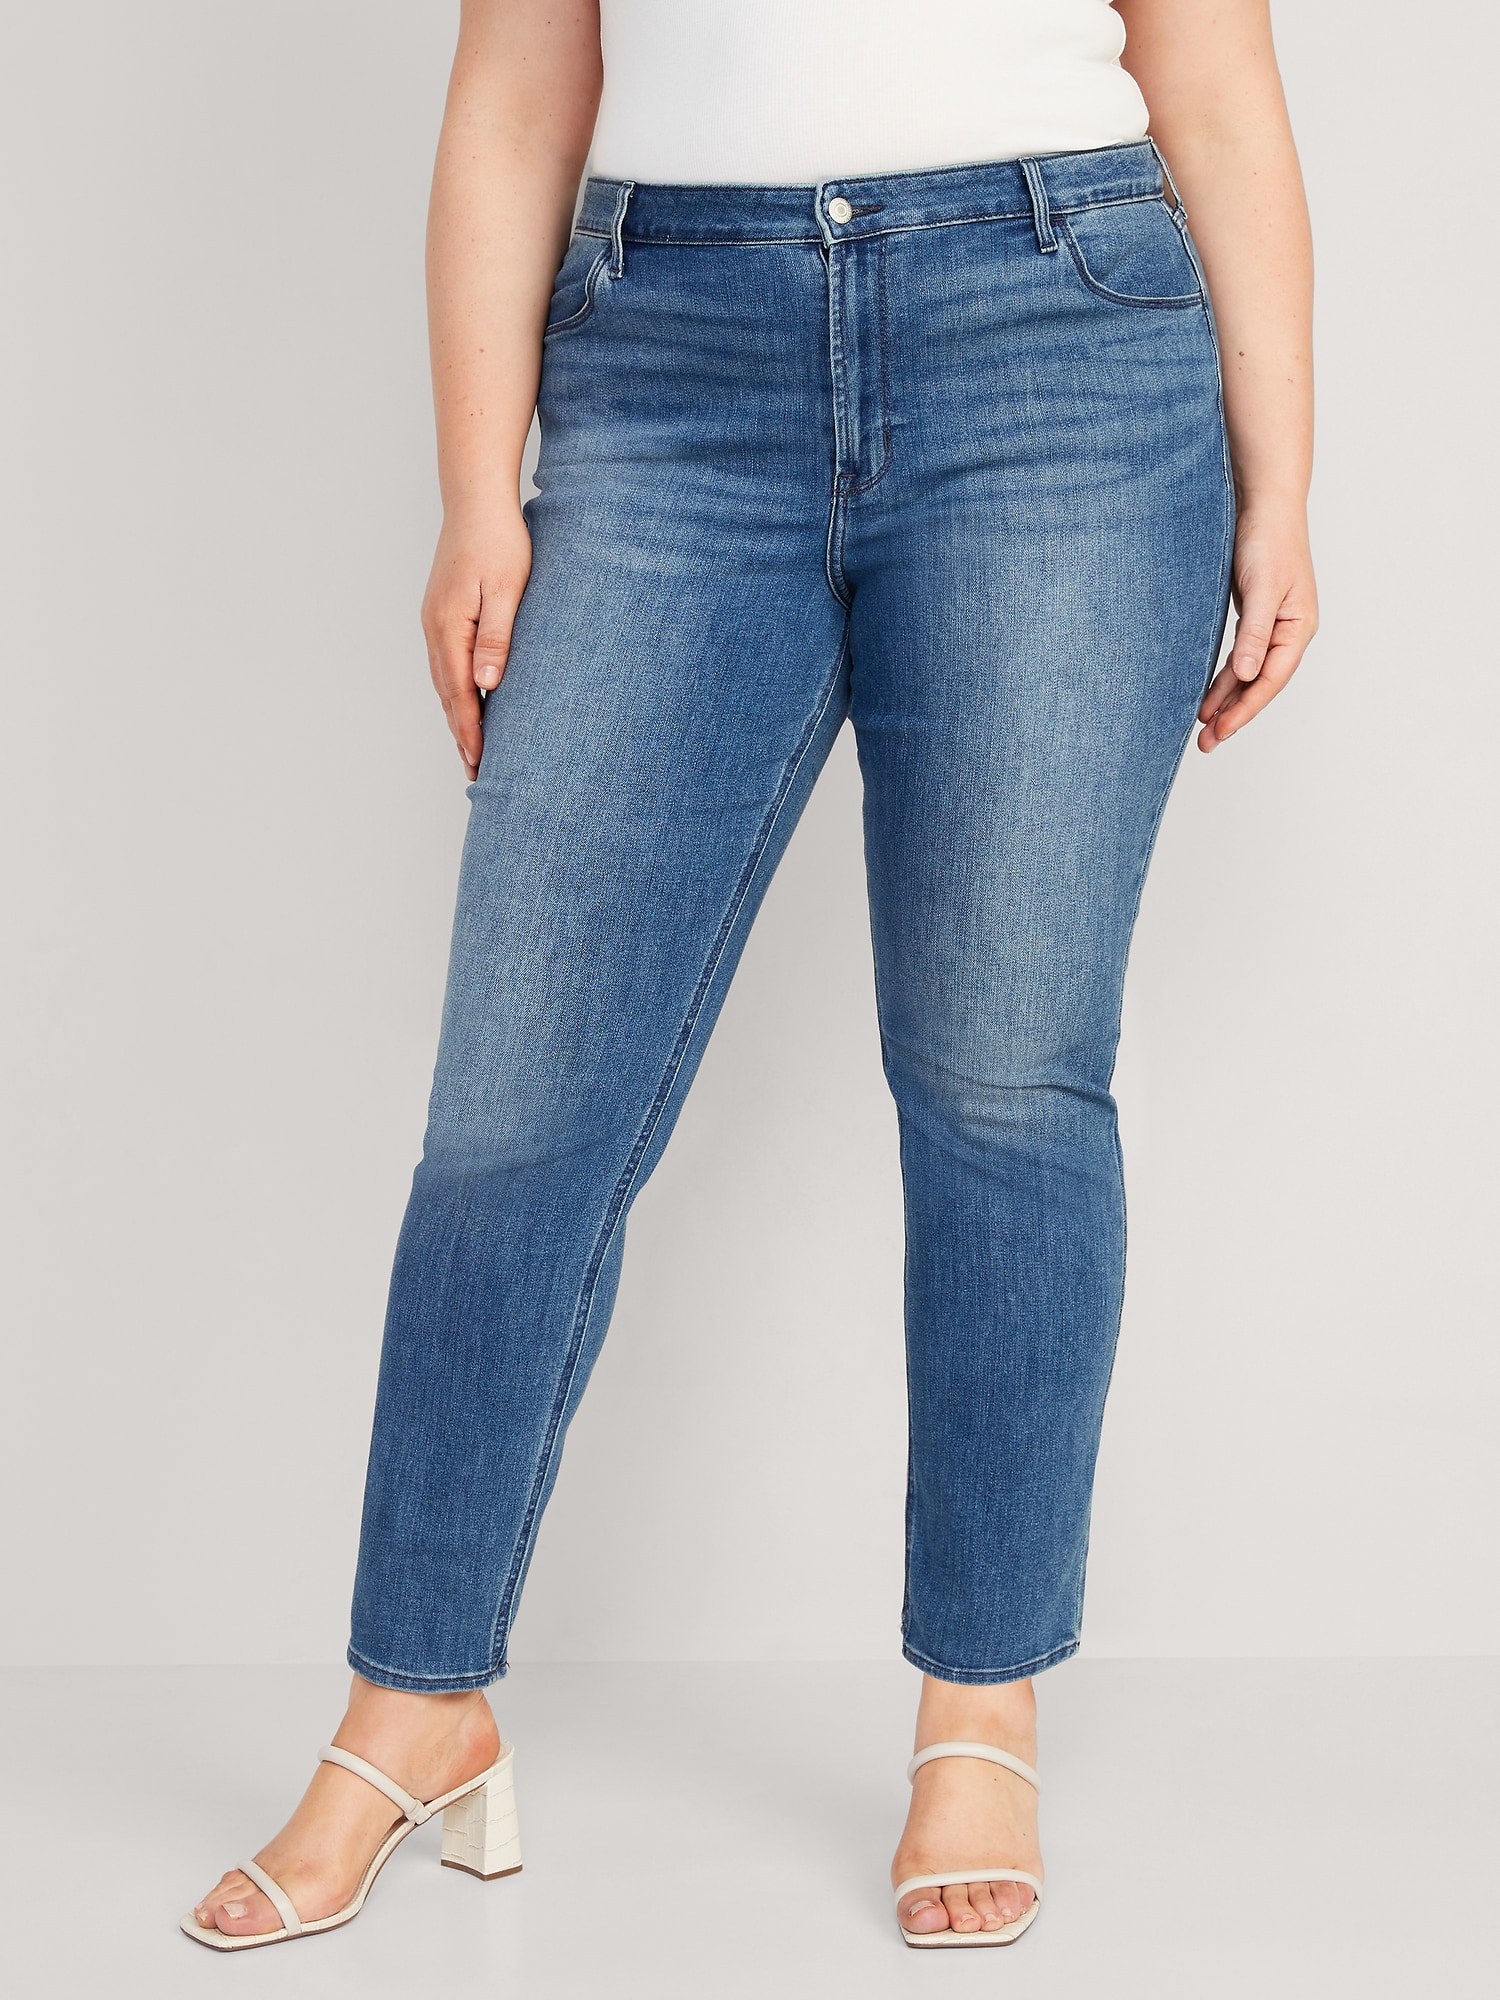 High-Waisted Slim Wide-Leg Jeans for Women, Old Navy